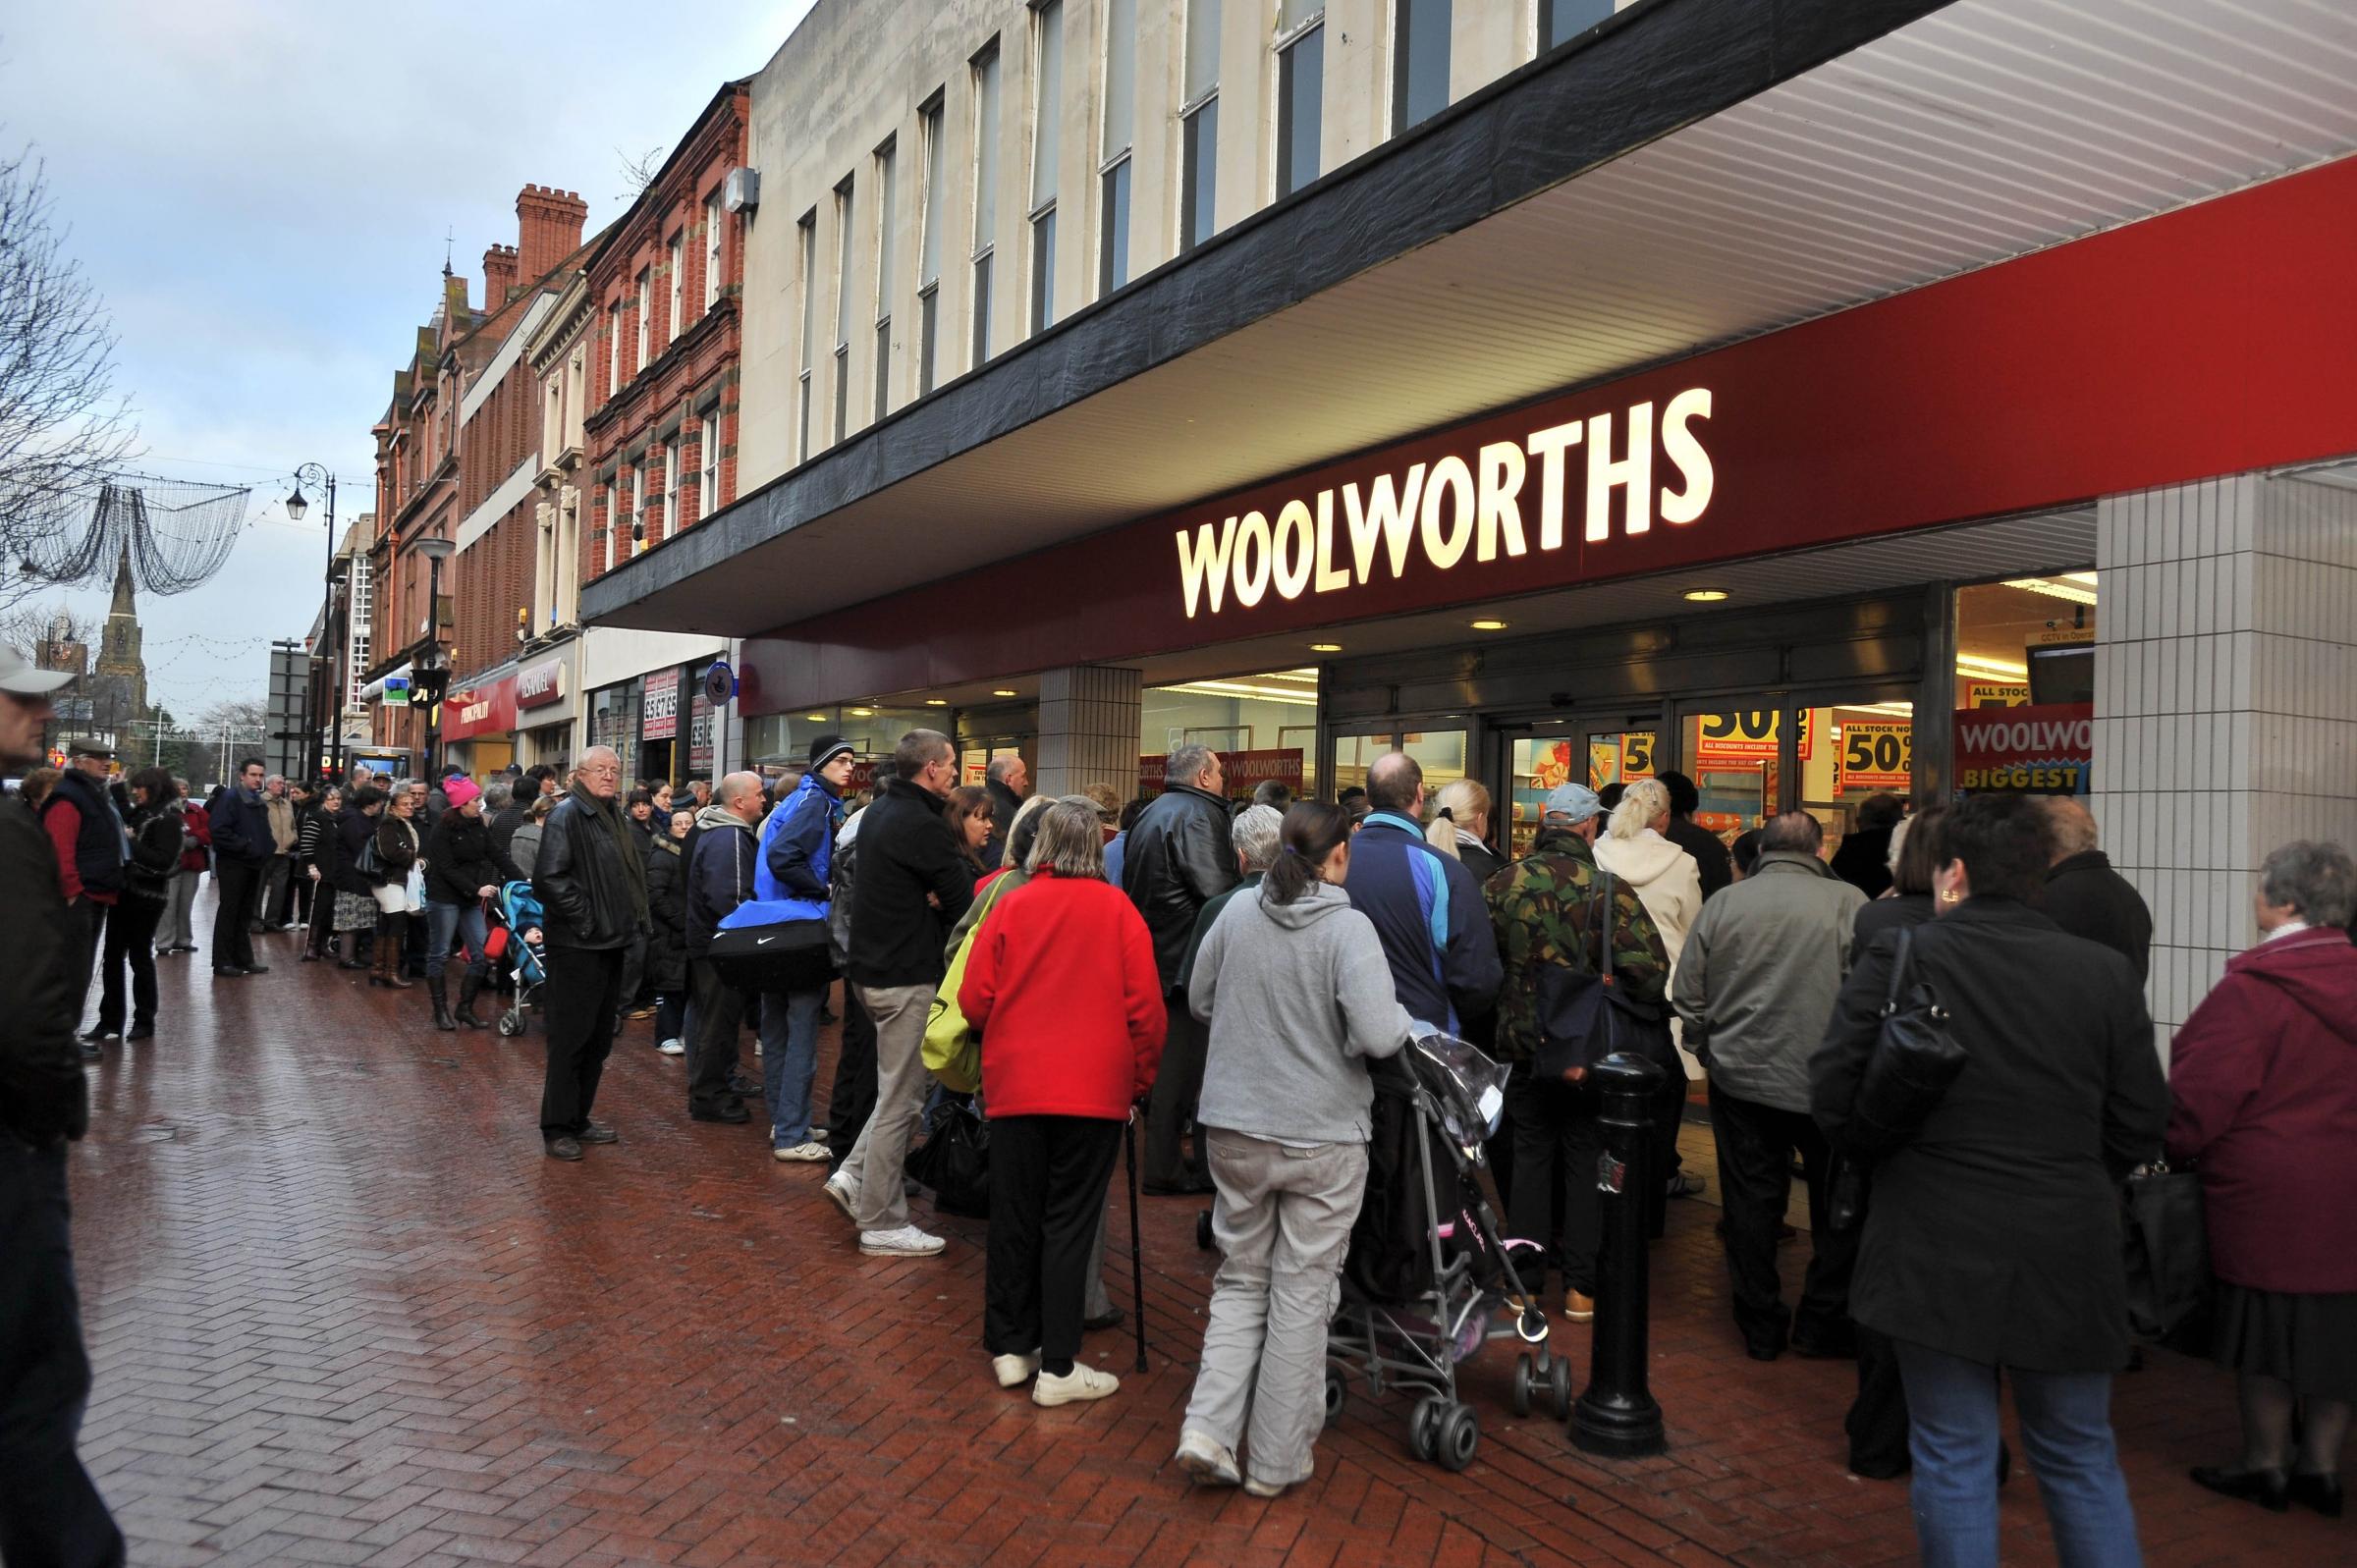 Woolworths, Wrexham. Shoppers queing before opening.